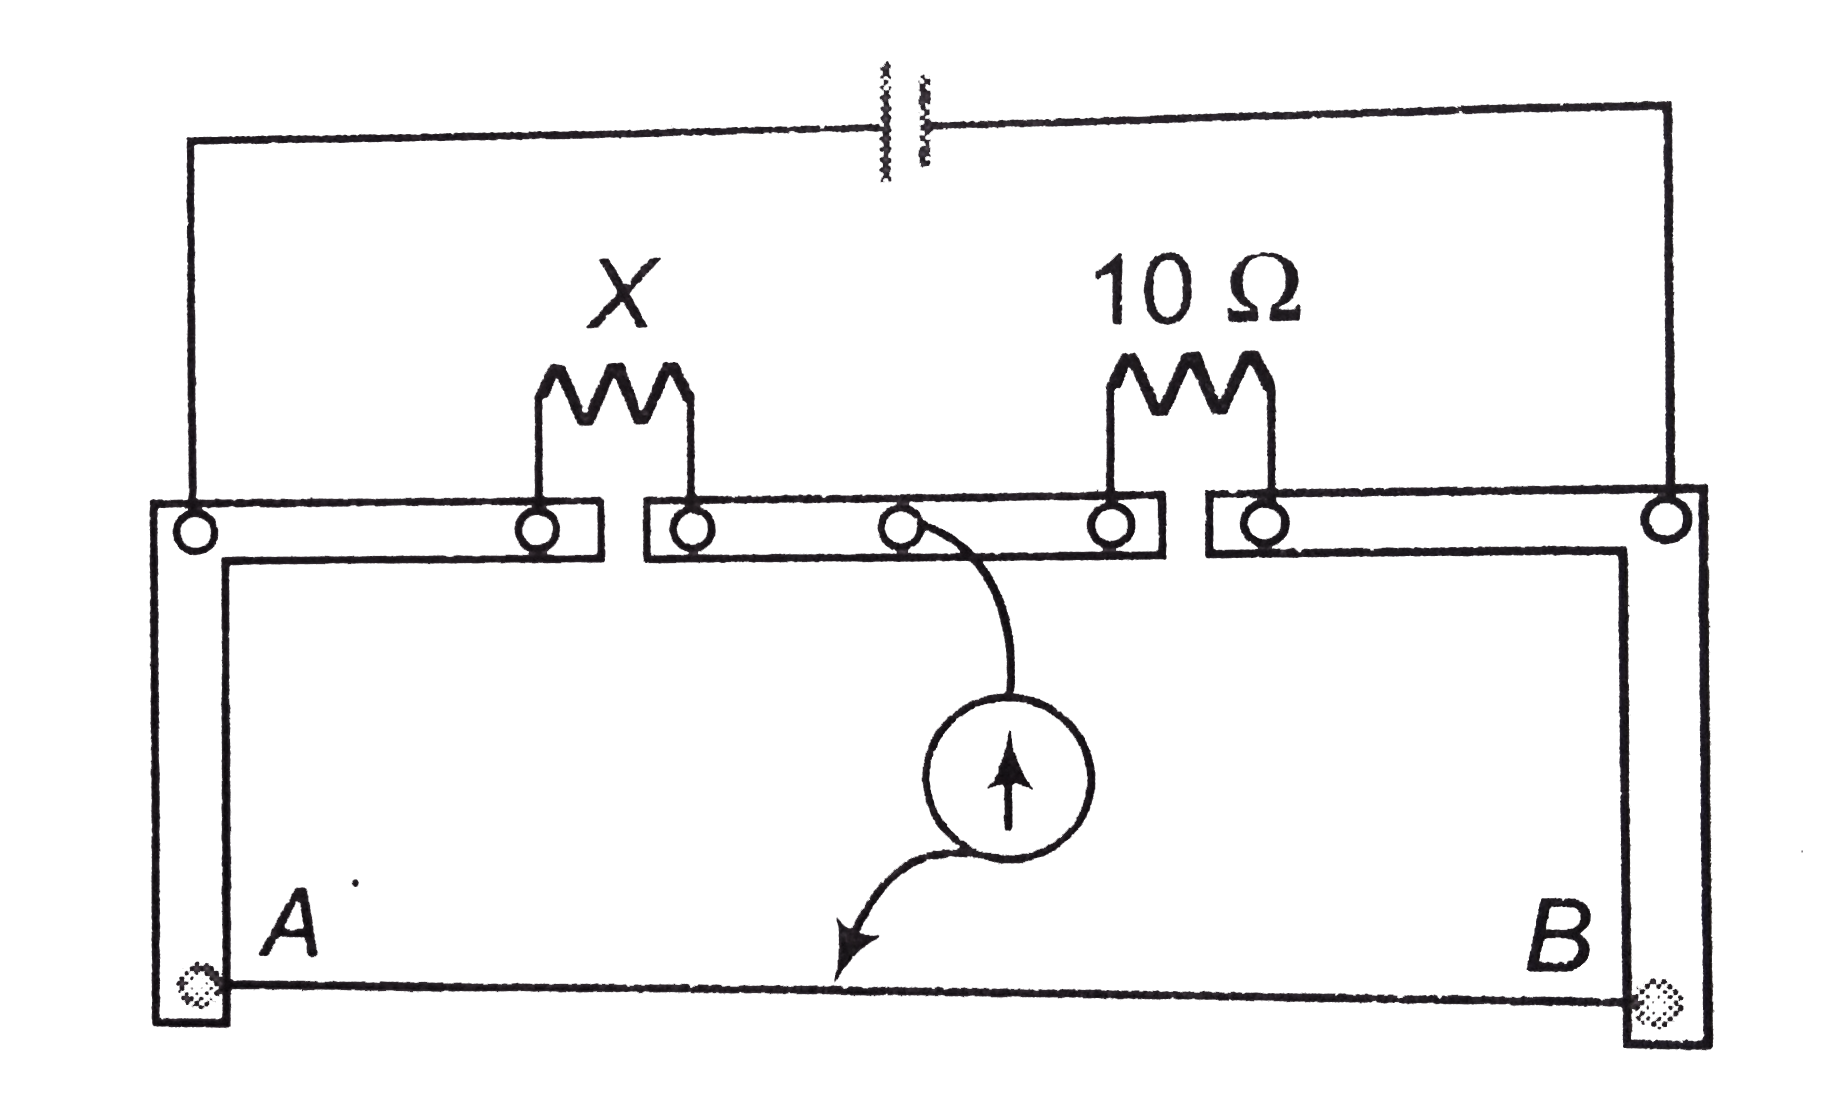 A meter bridge is setup as shown in figure, to determine an unknown resistance X using a standard 10Omega resistor. The galvanometer shows null point when tapping key is at 52 cm mark. The end correctiosnn are 1 cm and 2 cm respectively for the ends A and B. The determined value of X is